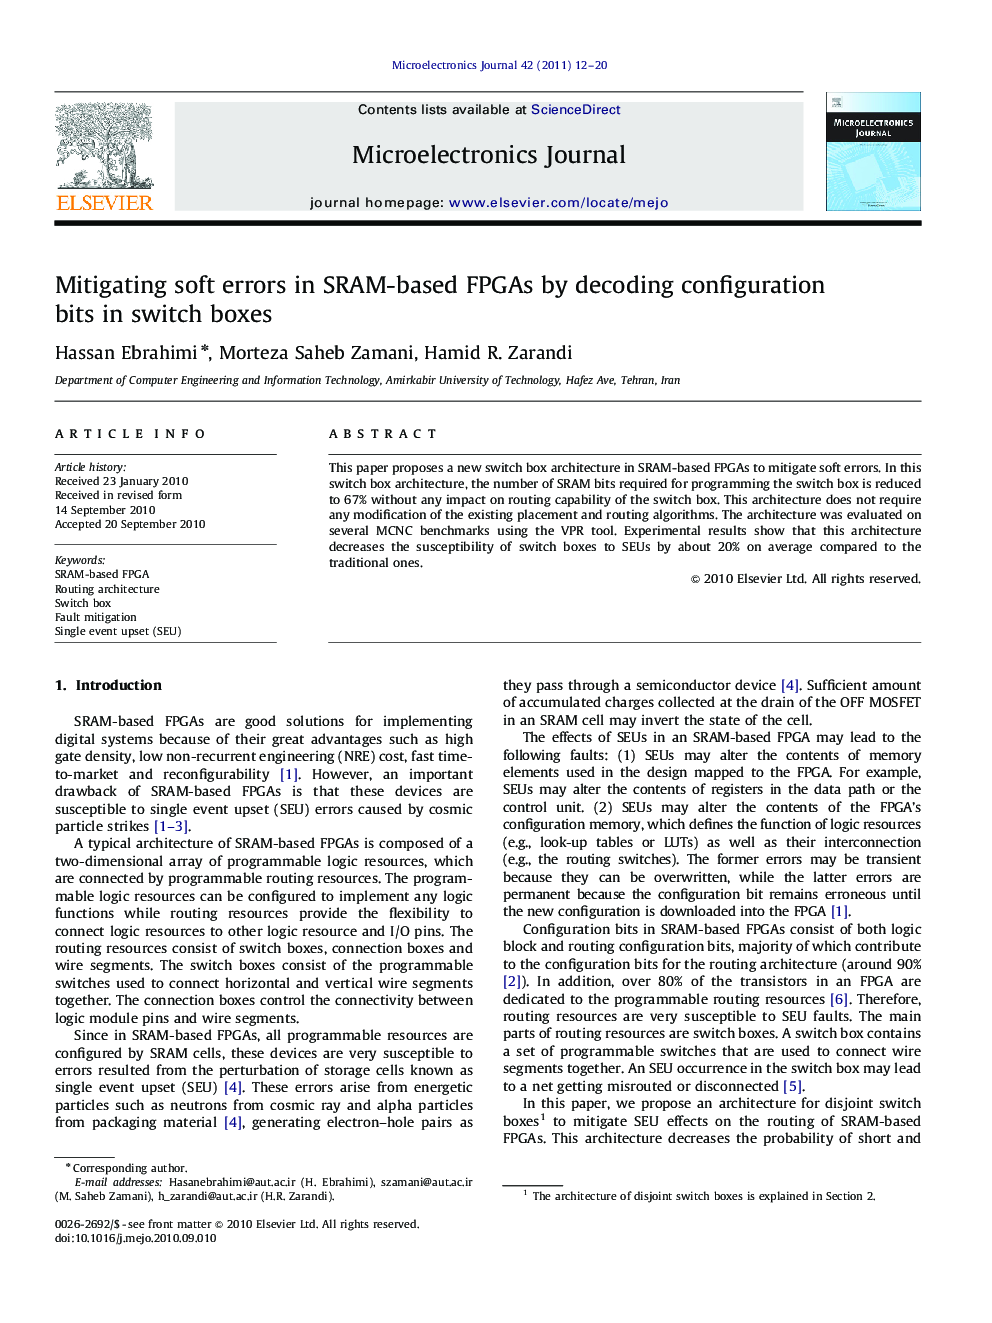 Mitigating soft errors in SRAM-based FPGAs by decoding configuration bits in switch boxes